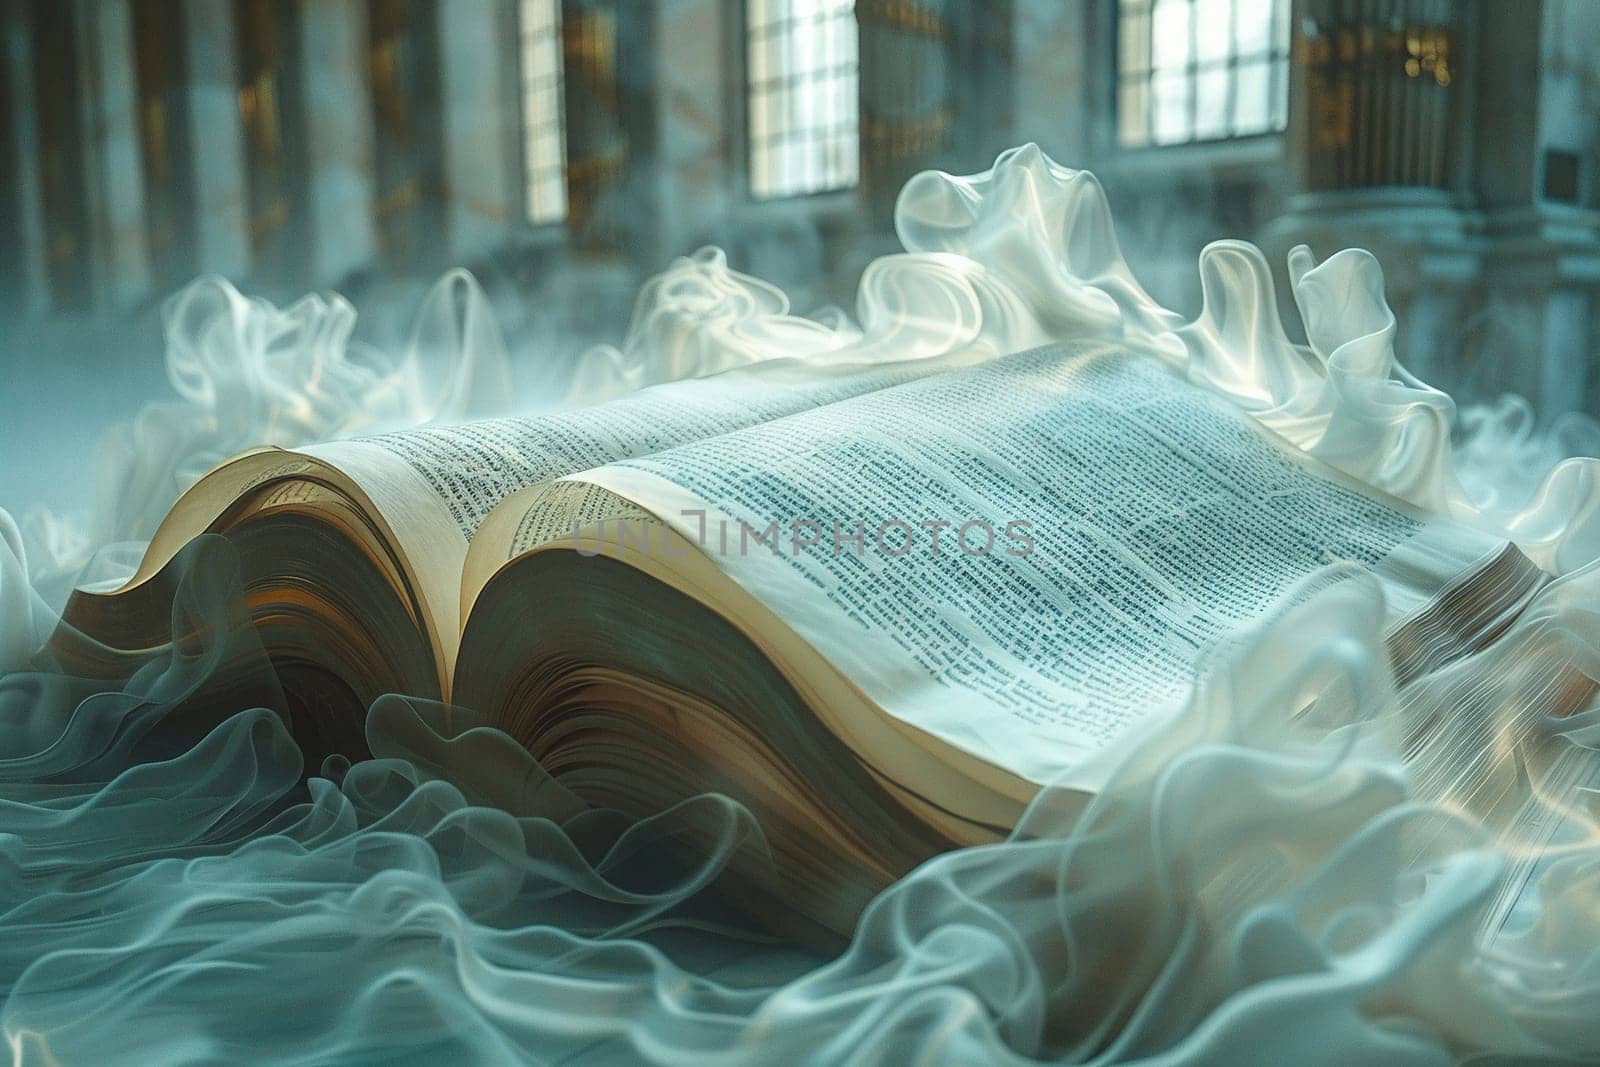 Mormon Scripture Pages Turning in a Soft Breeze The pages blur into one another by Benzoix